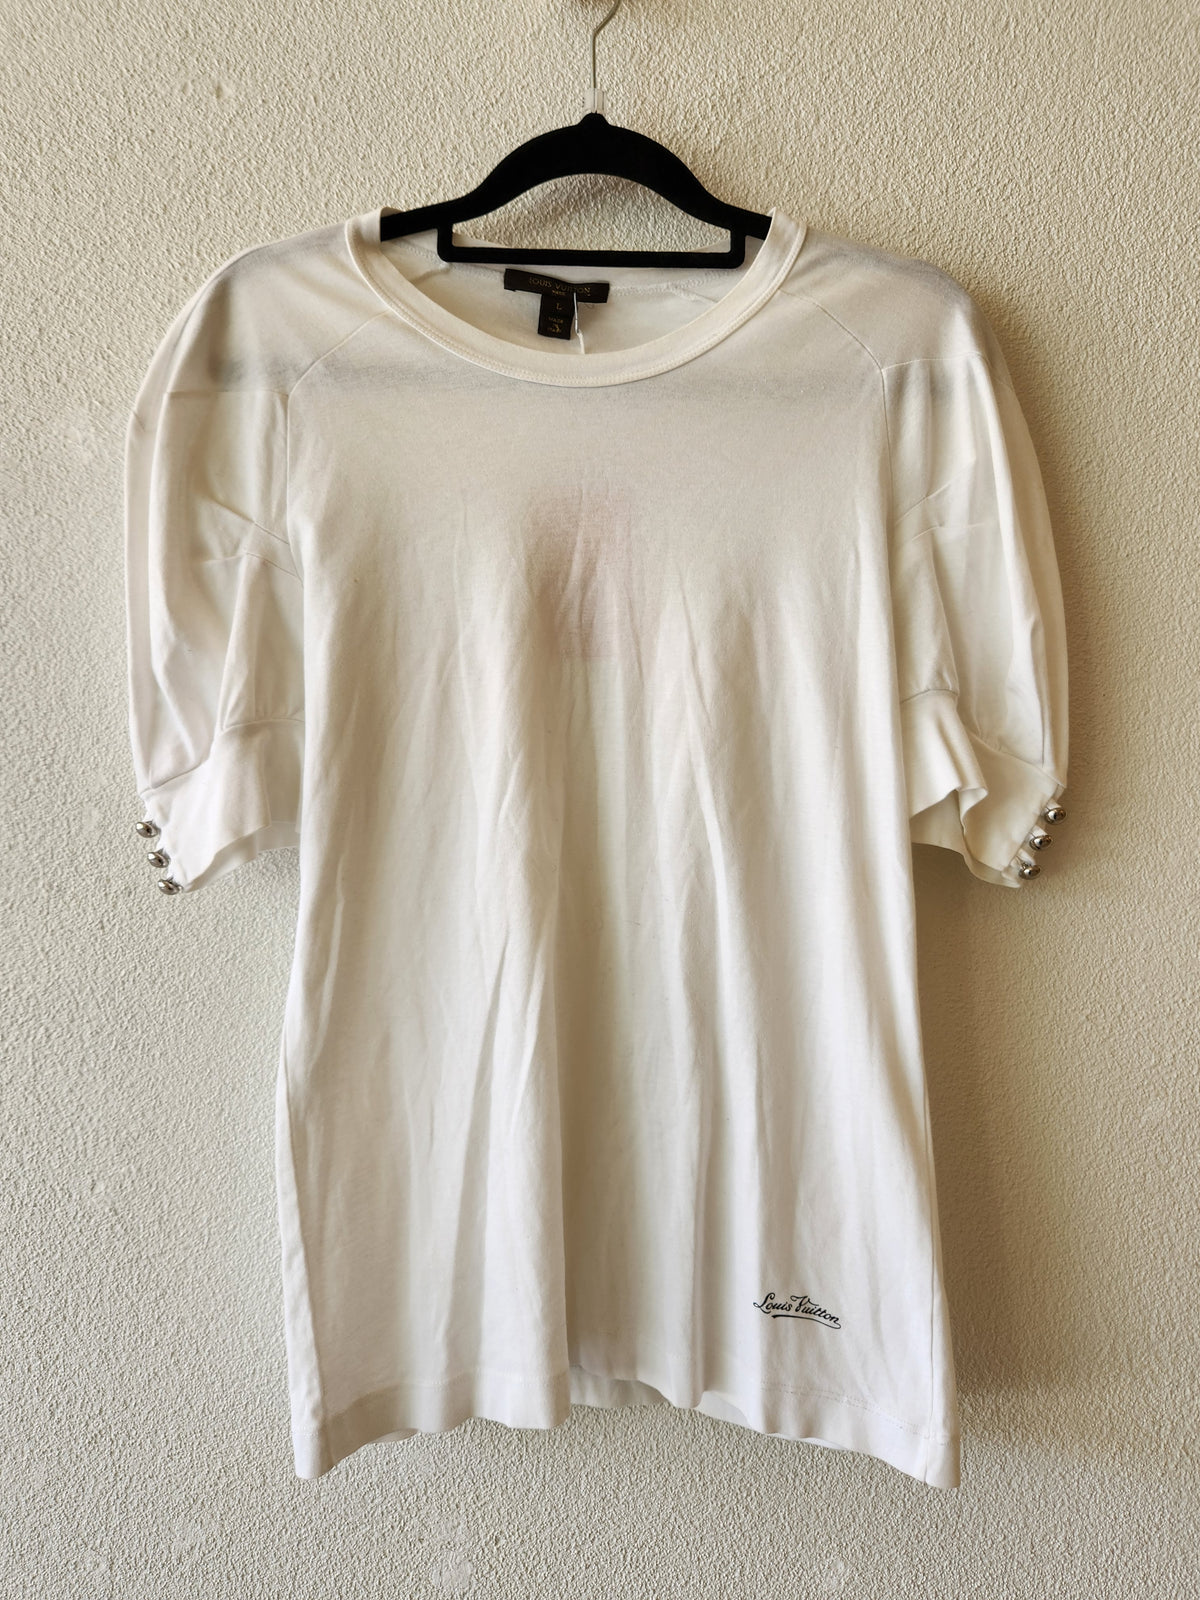 Luis Vuitton White cotton T with sleeve detail S